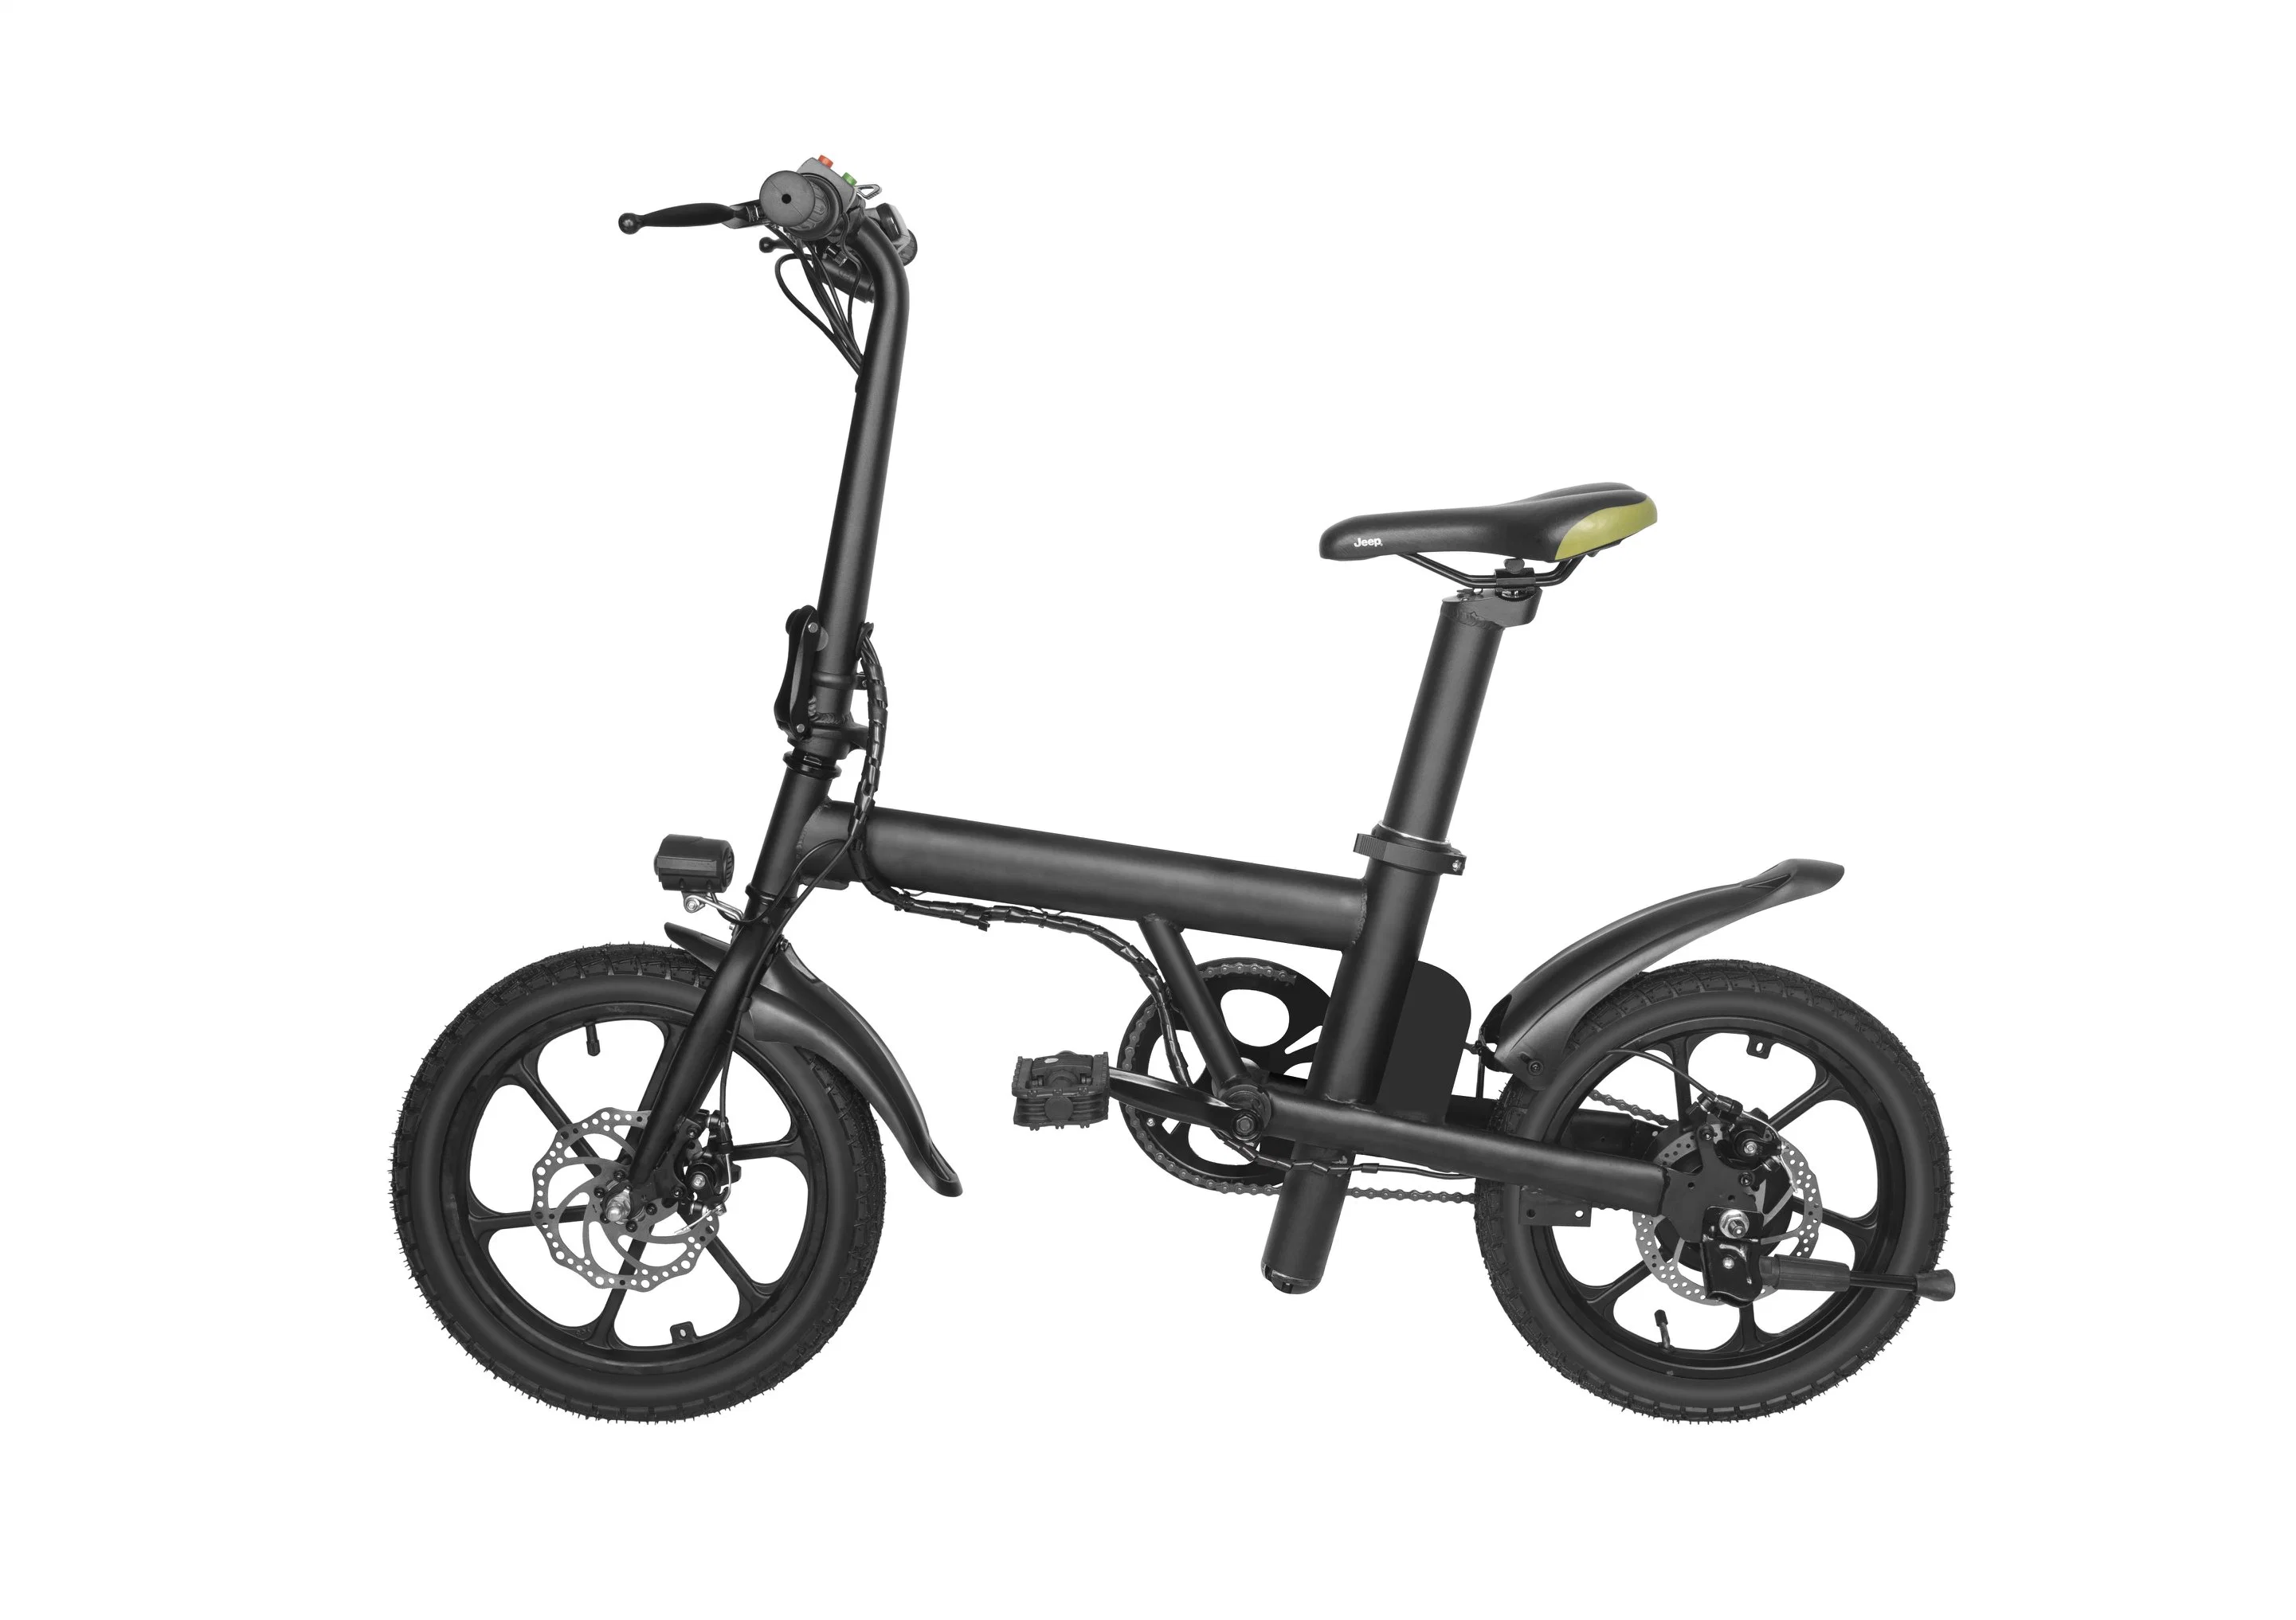 Motorcycle Electric Scooter Bicycle Electric Bike Electric Motorcycle Scooter Motor Scooter Folding Electric Bike Female 250W Motor 36V 6ah Battery Speed